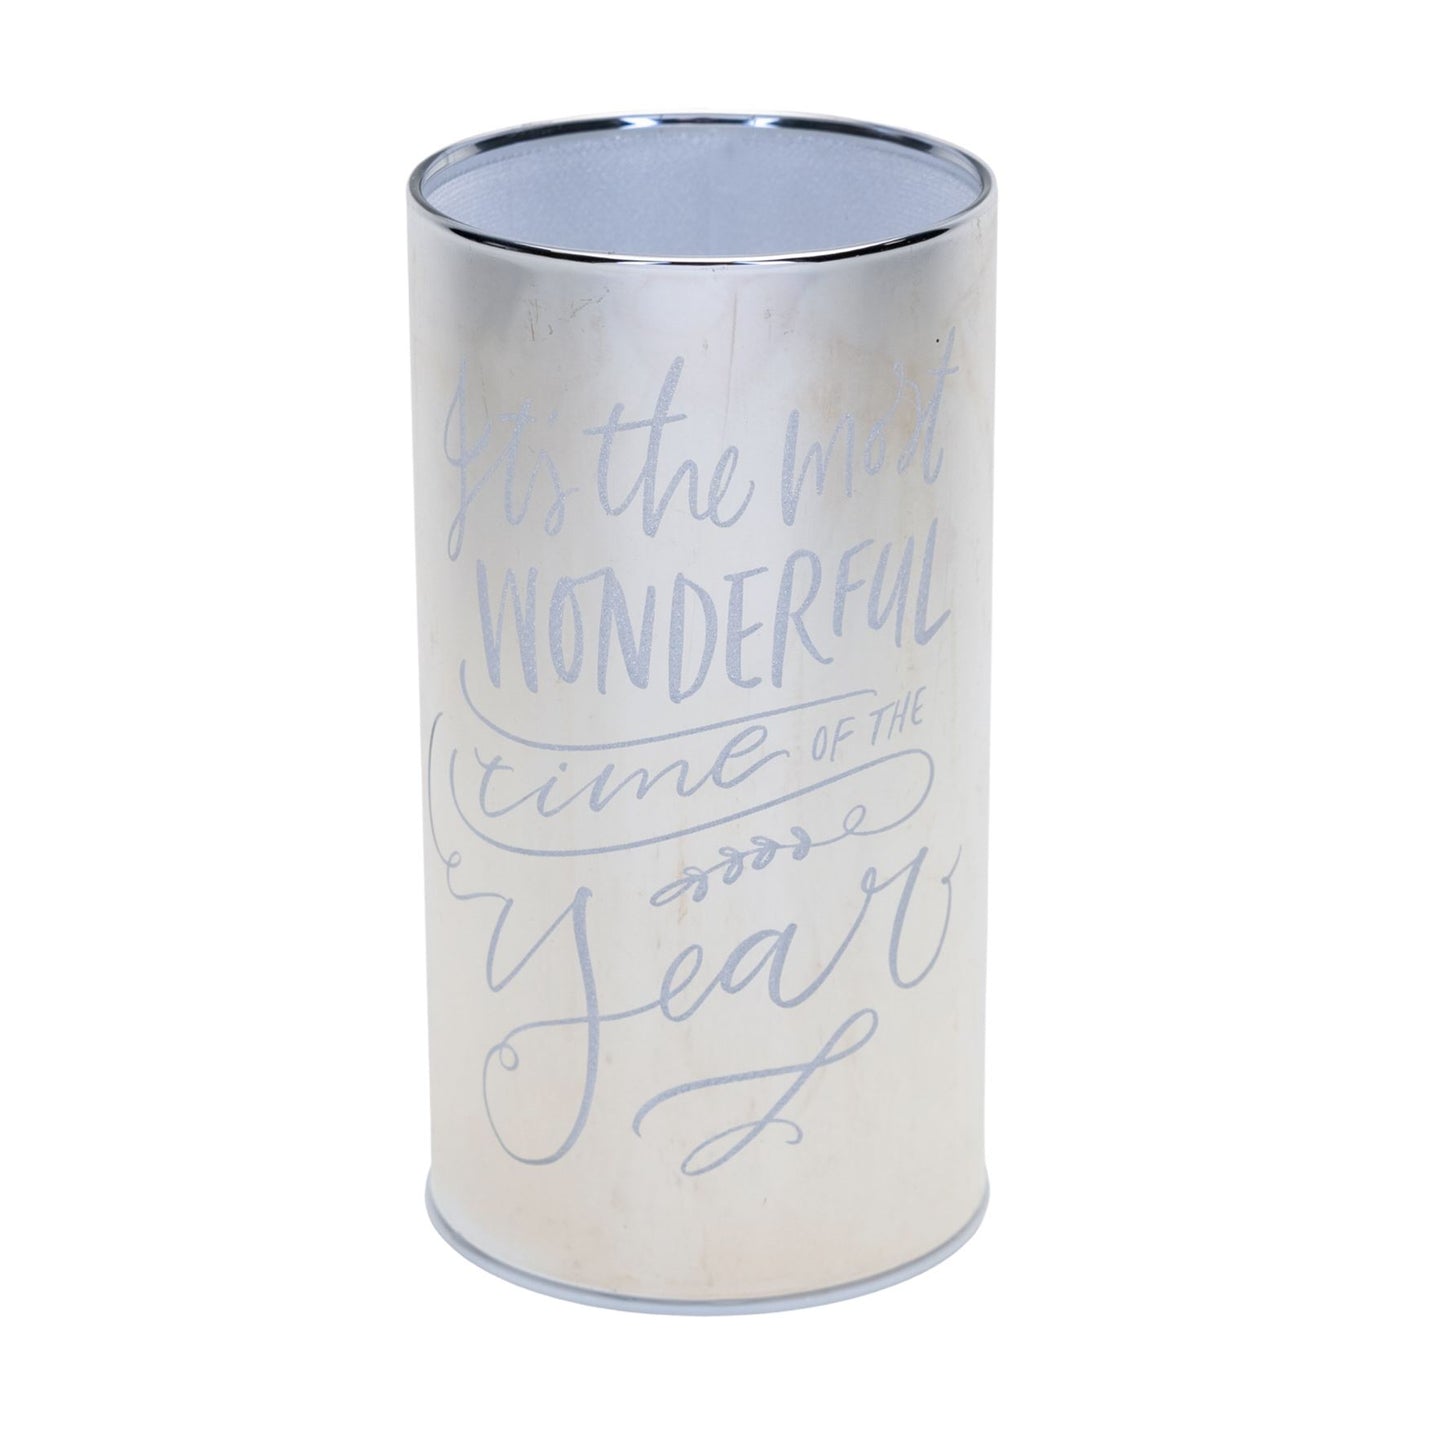 LED Light Up Glass Ornament "The Most Wonderful Time"